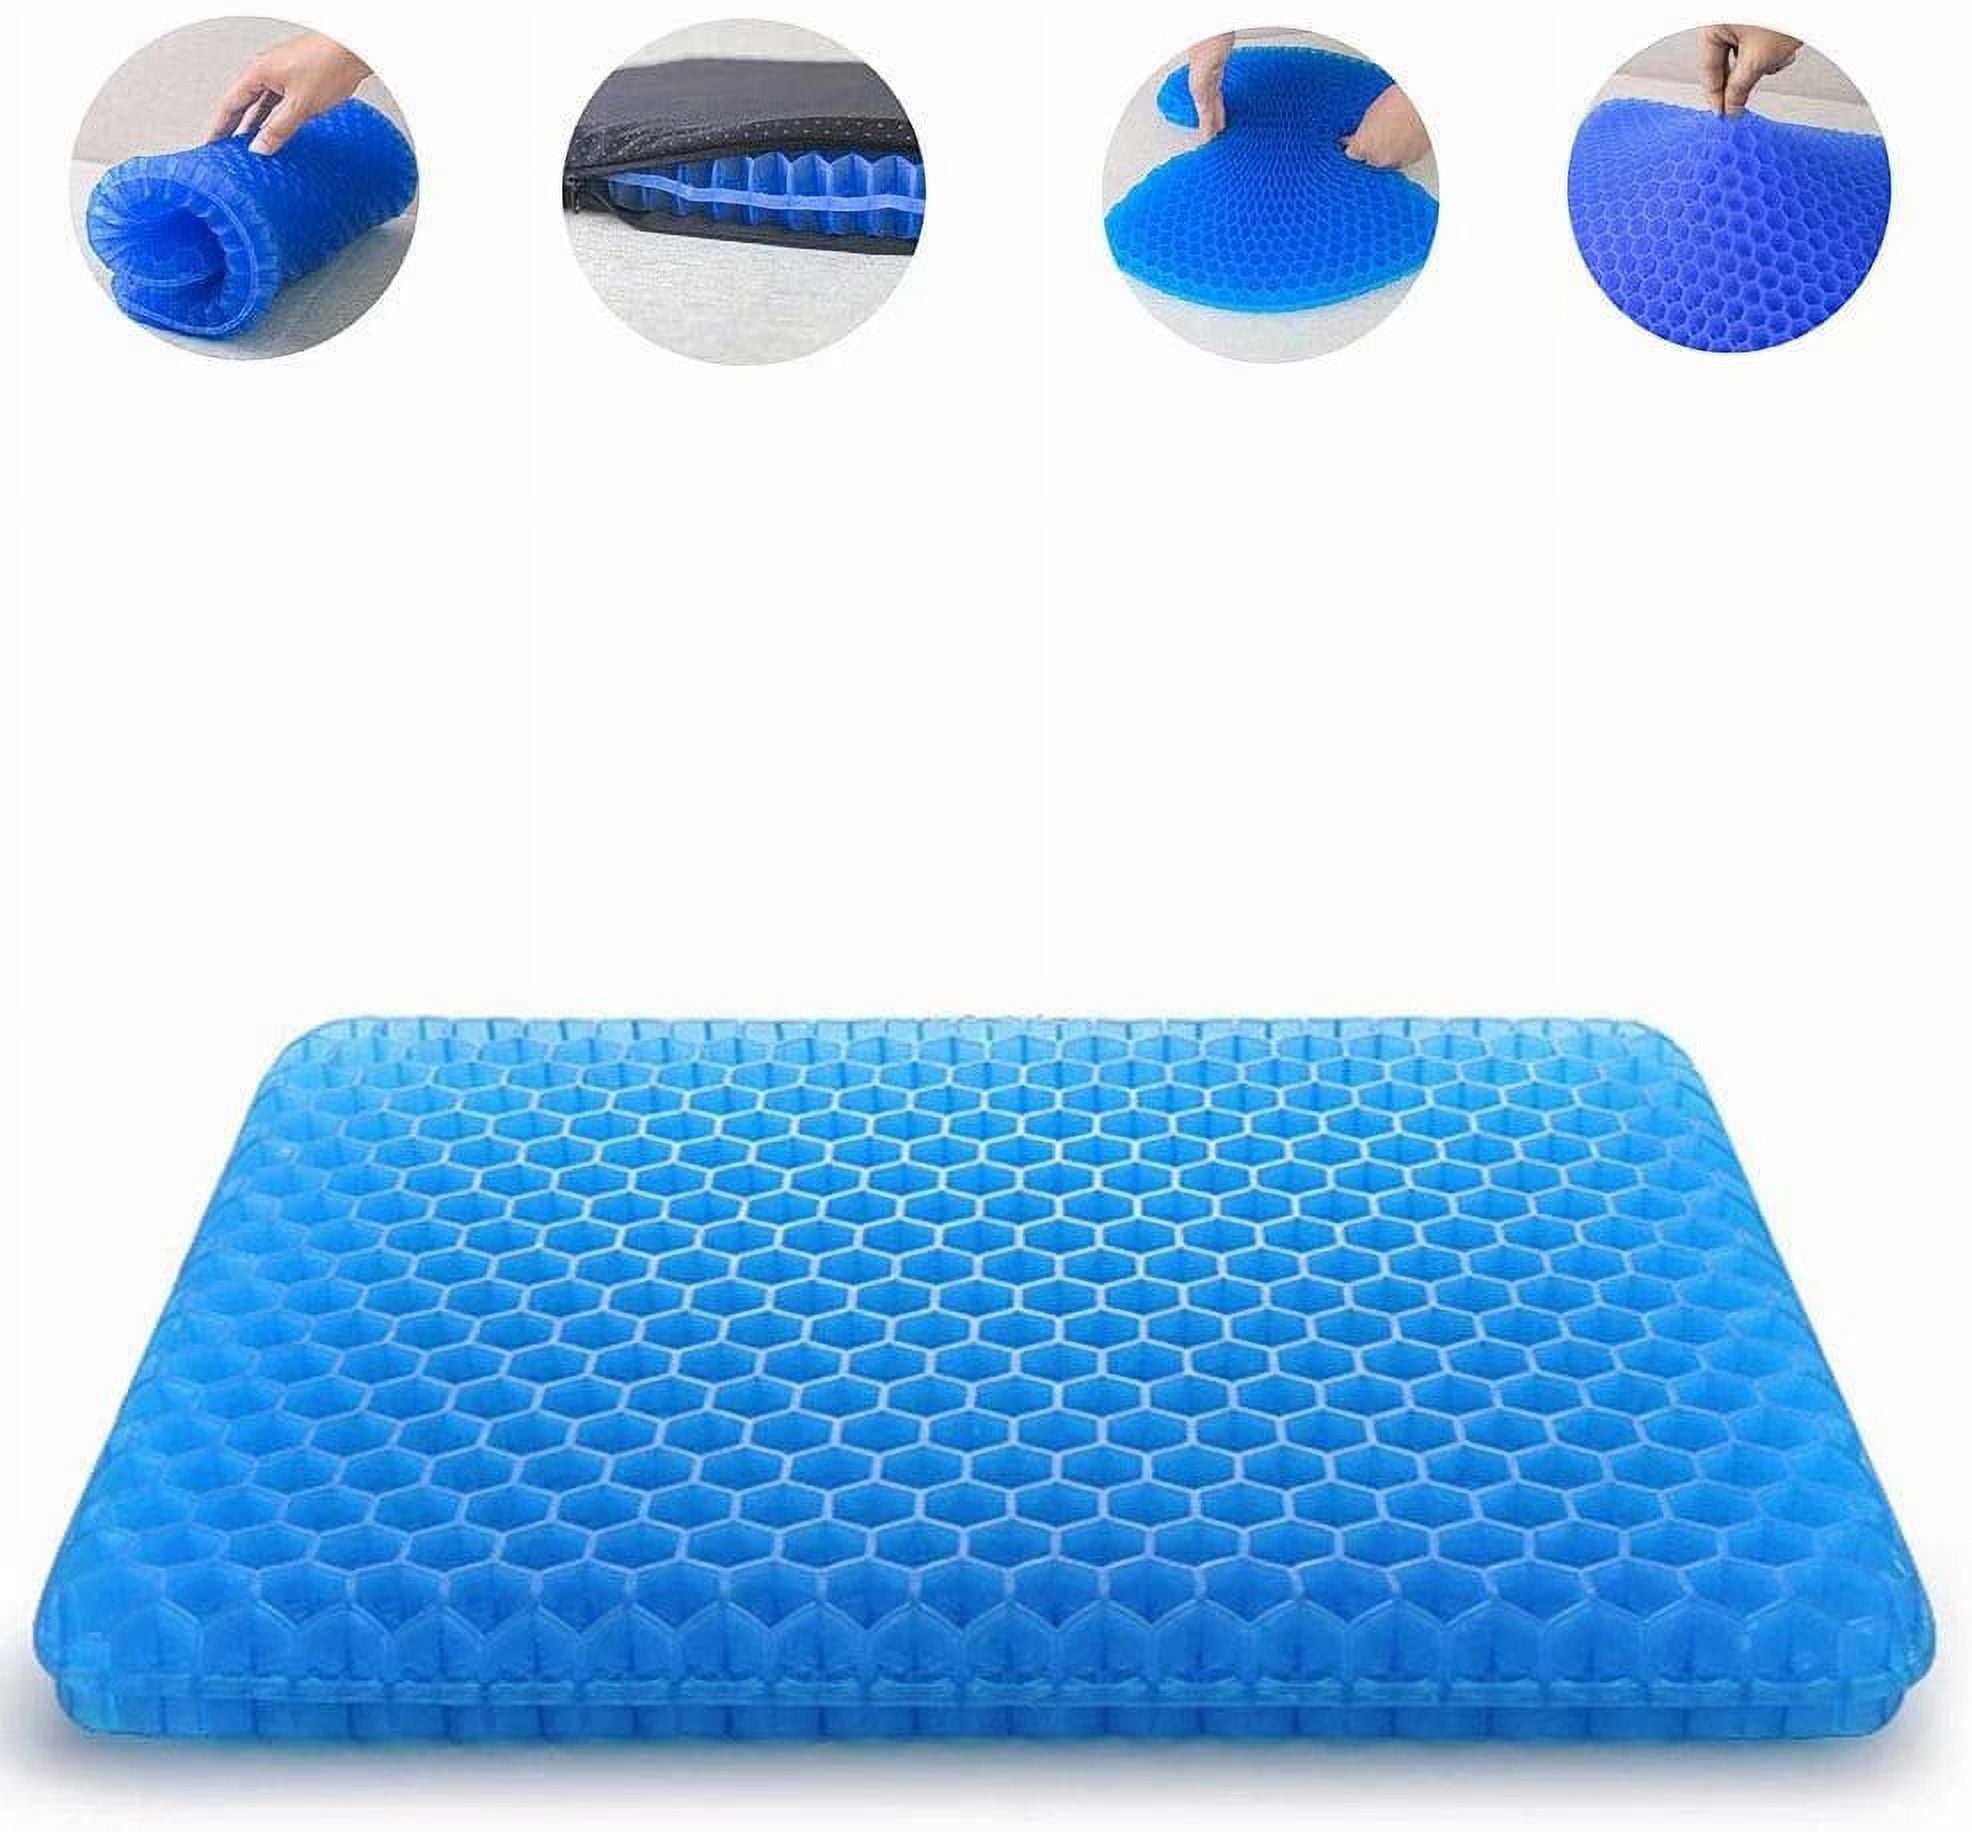 Gel Seat Cushion, Super Large (19x18x1.6inch) Chair Pads with Non-Slip  Cover for Home Office Car Seat Wheelchair, Soft Breathable Honeycomb Seat